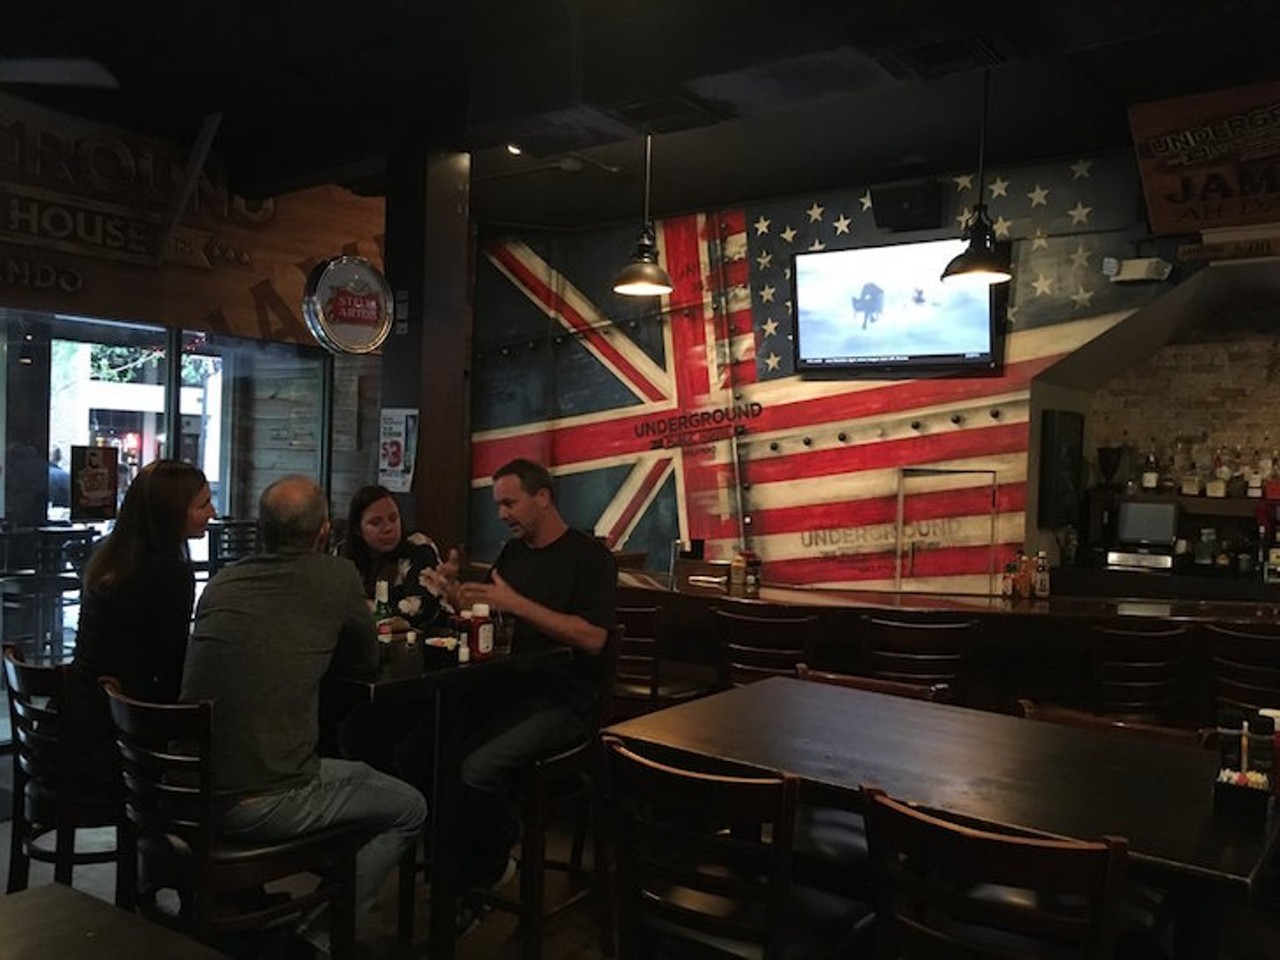 Underground Public House  
19 S. Orange Ave., 407-841-4000
Eat brunch with an underground vibe. Brunch is served Sundays from 12 p.m. to 3 p.m. with bottomless mimosas for $12. 
Photo via Yelp/Herbert E.